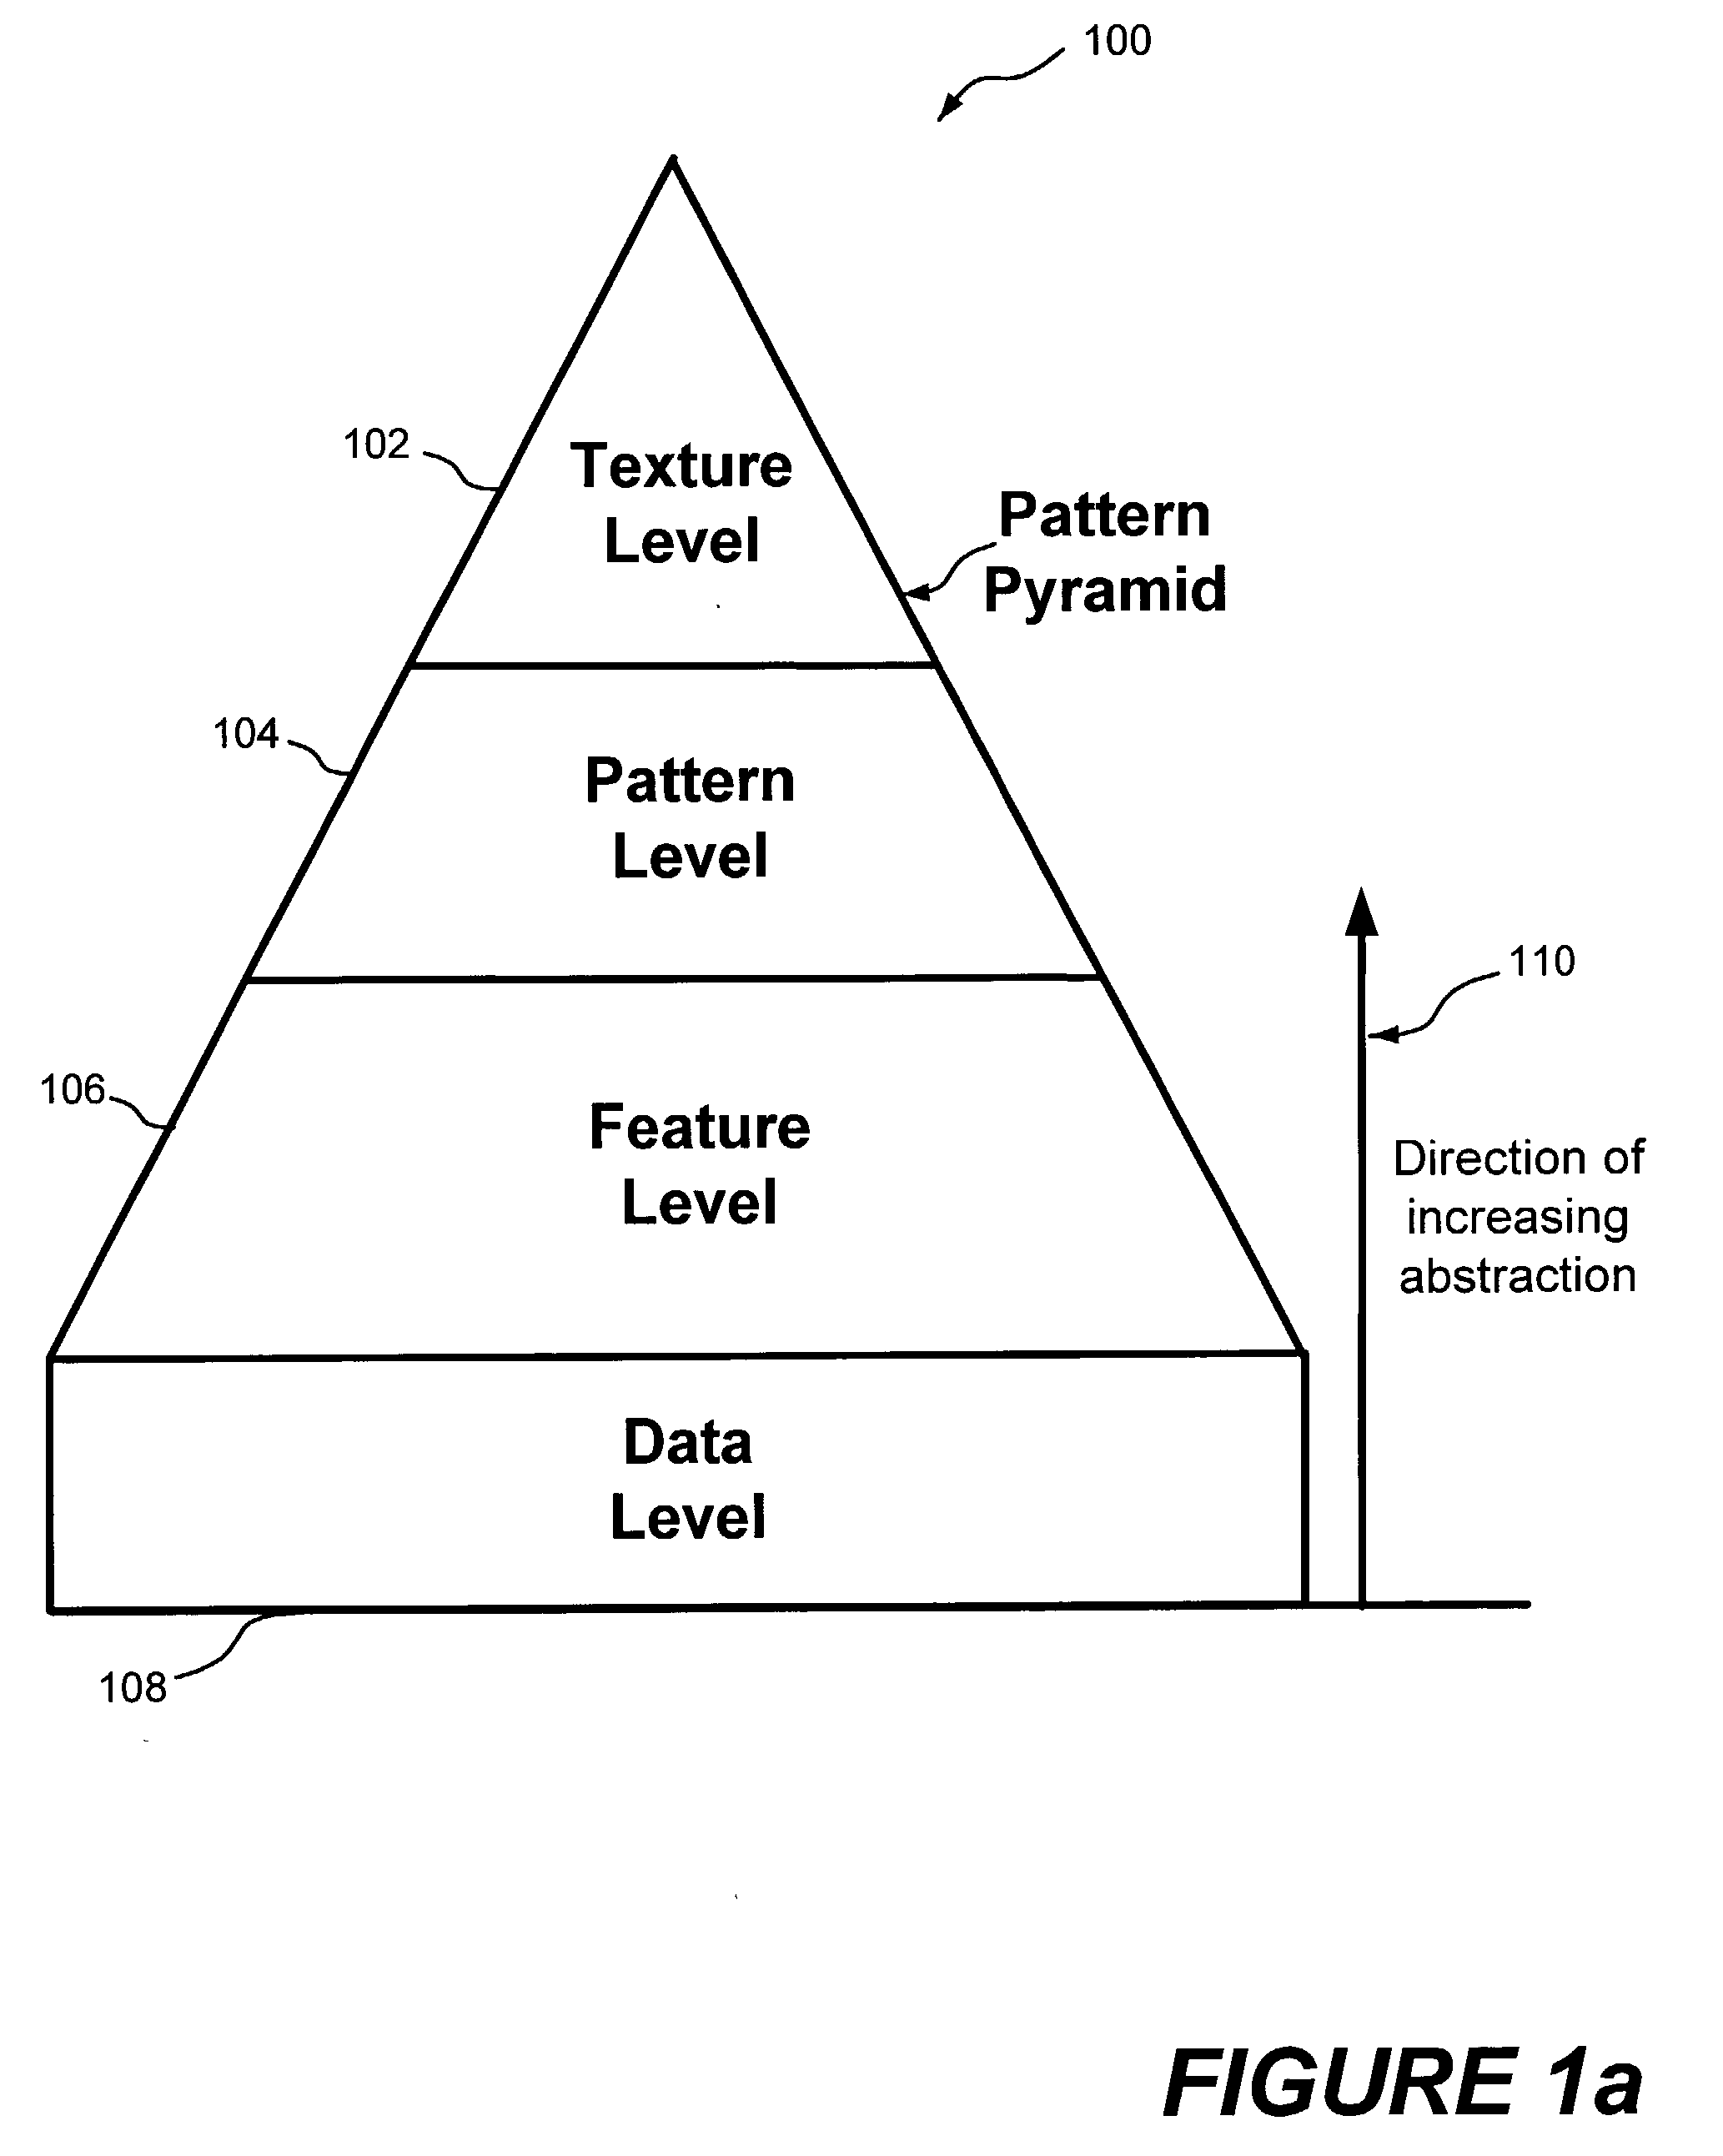 Pattern recognition template construction applied to oil exploration and production